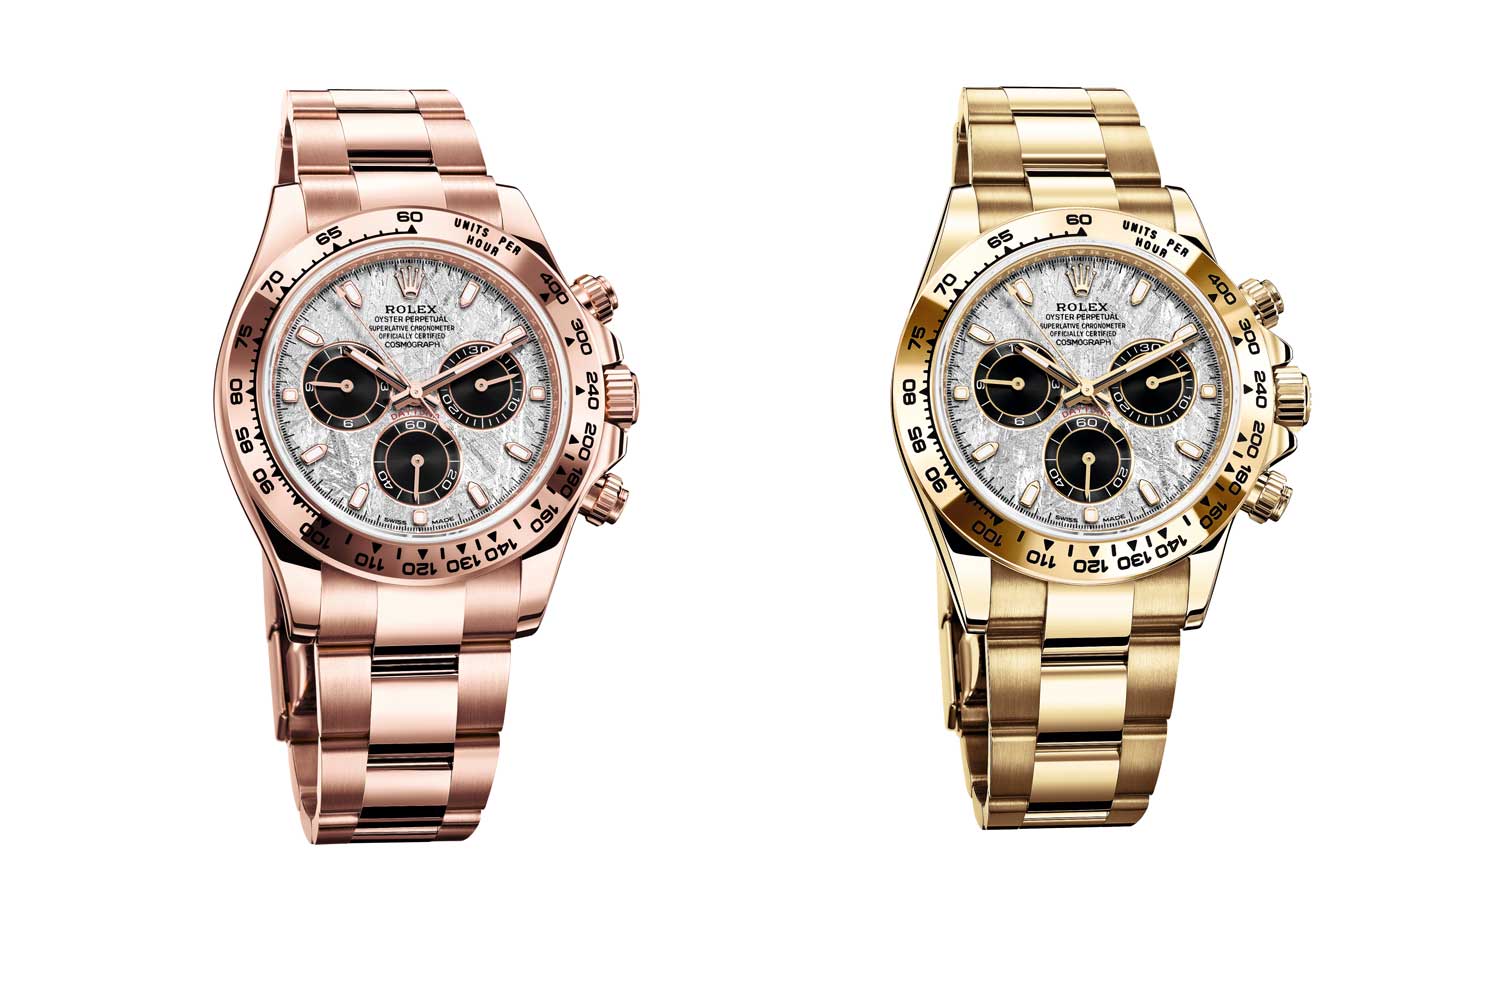 All that glitters is gold: Oyster Perpetual Cosmograph Daytona in 18 ct Everose and yellow gold, both with meteorite dials